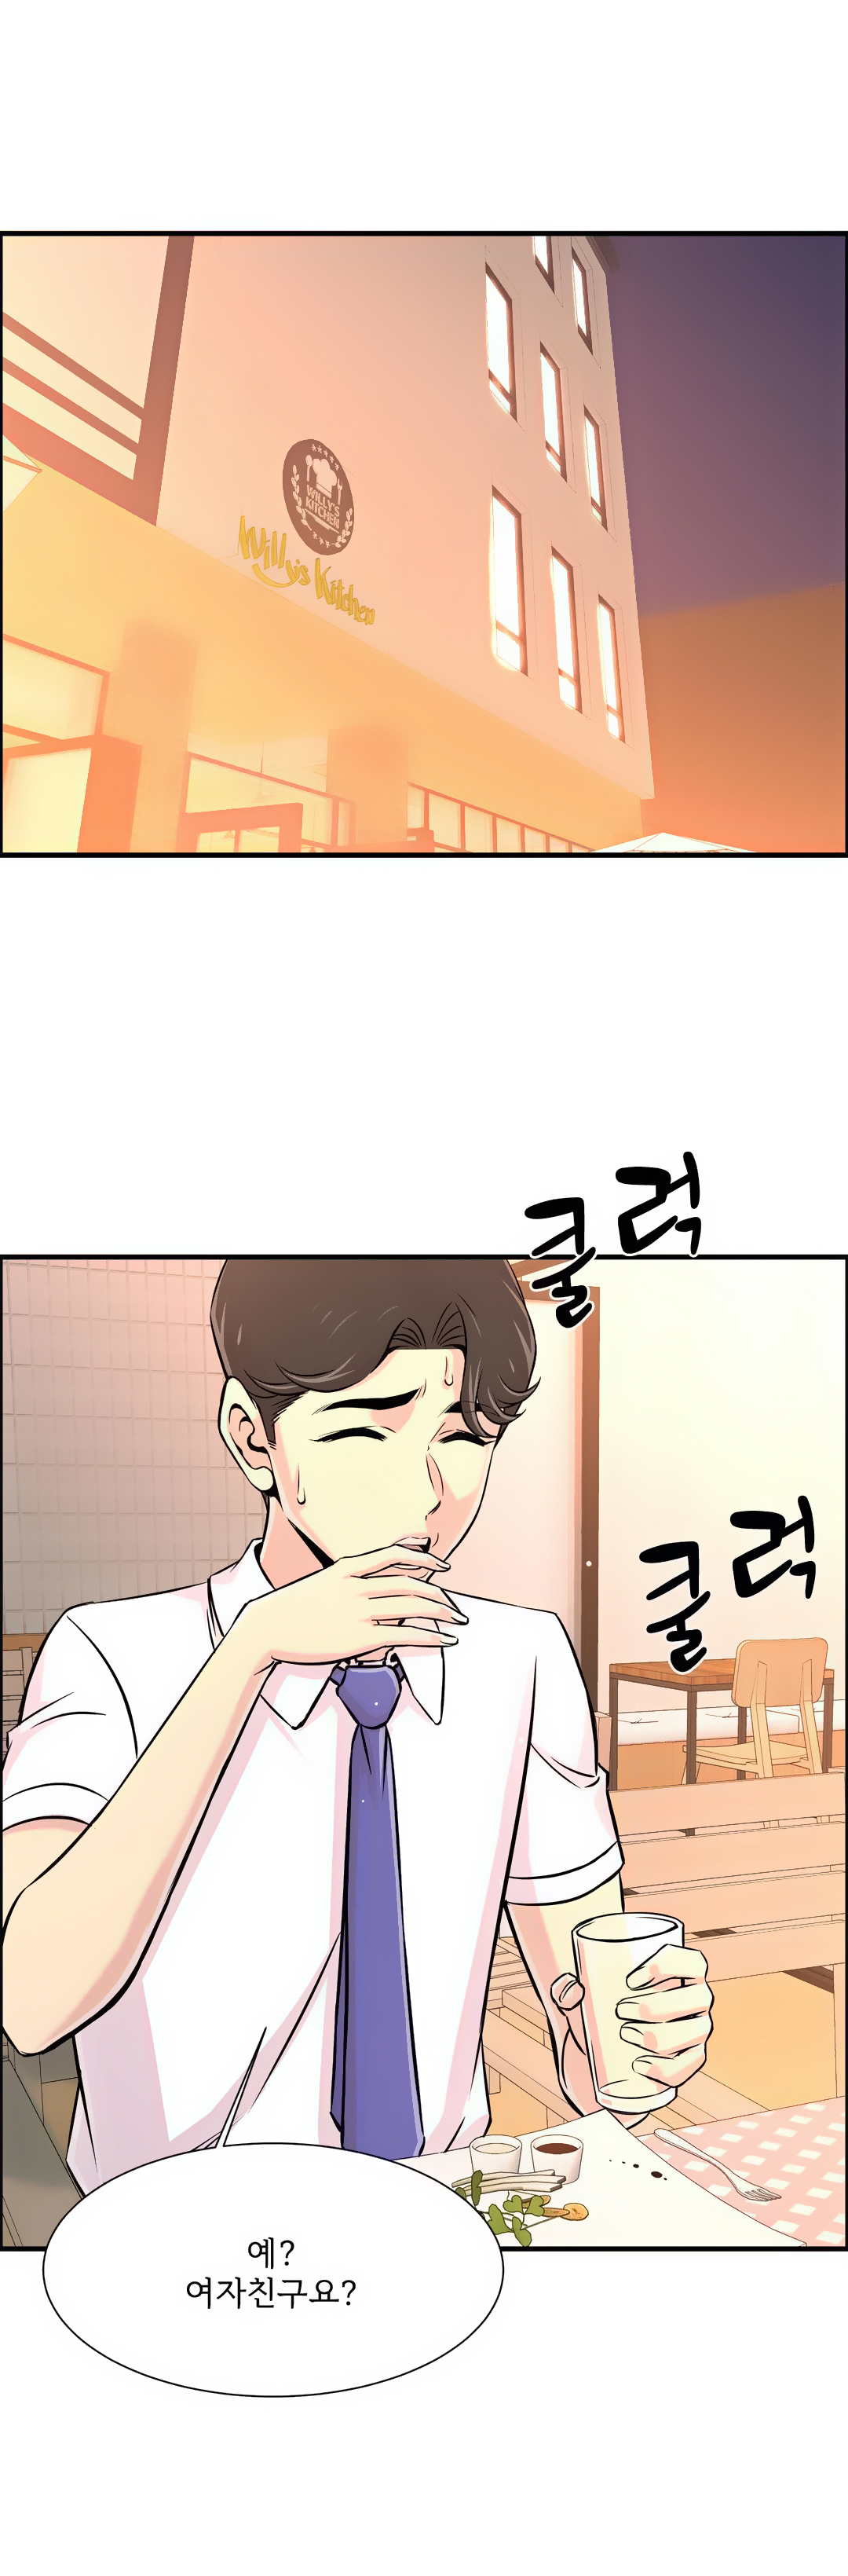 Cram School Scandal Raw - Chapter 21 Page 2